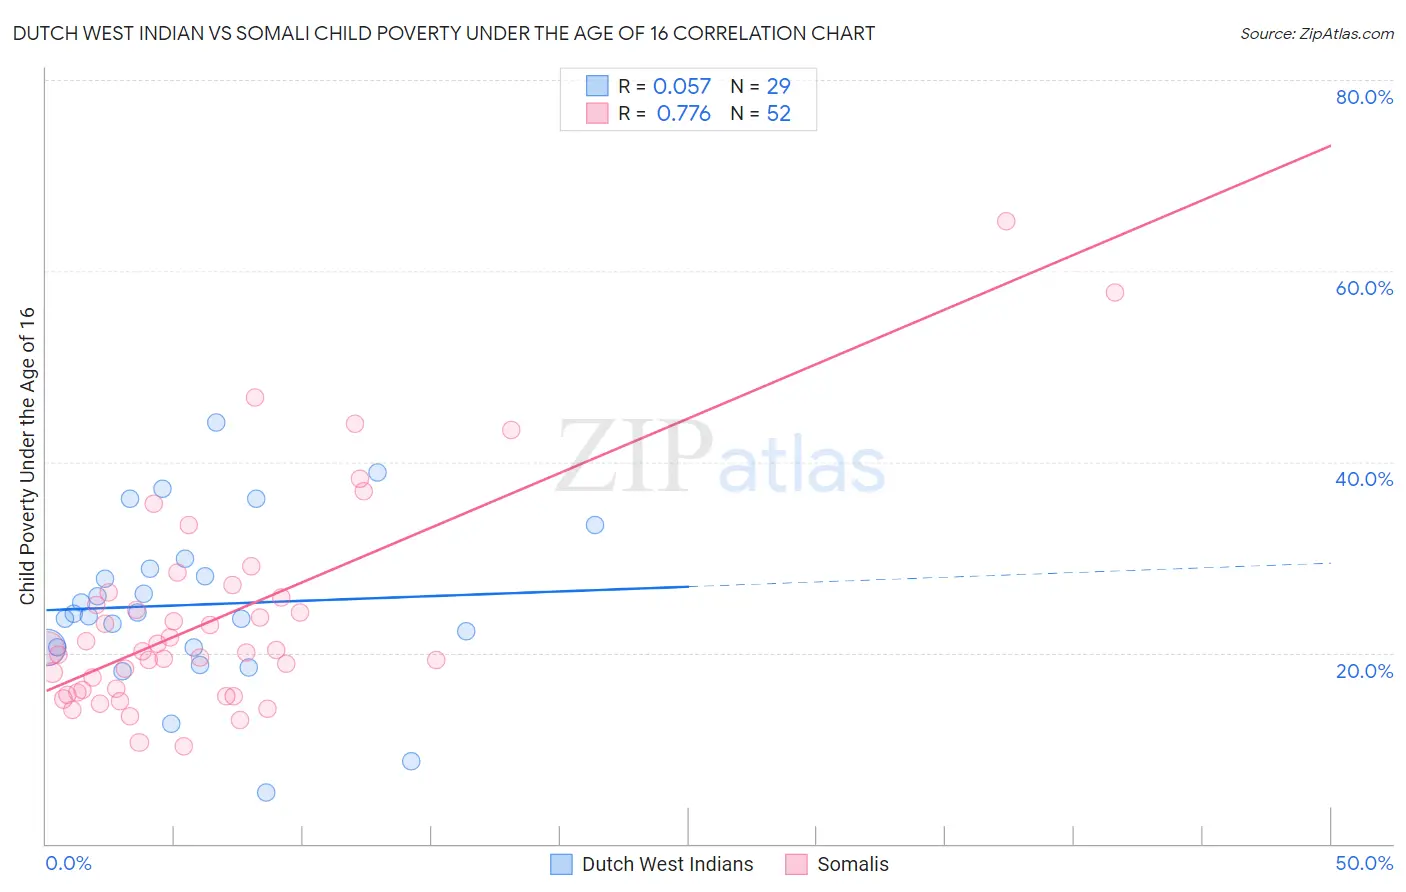 Dutch West Indian vs Somali Child Poverty Under the Age of 16